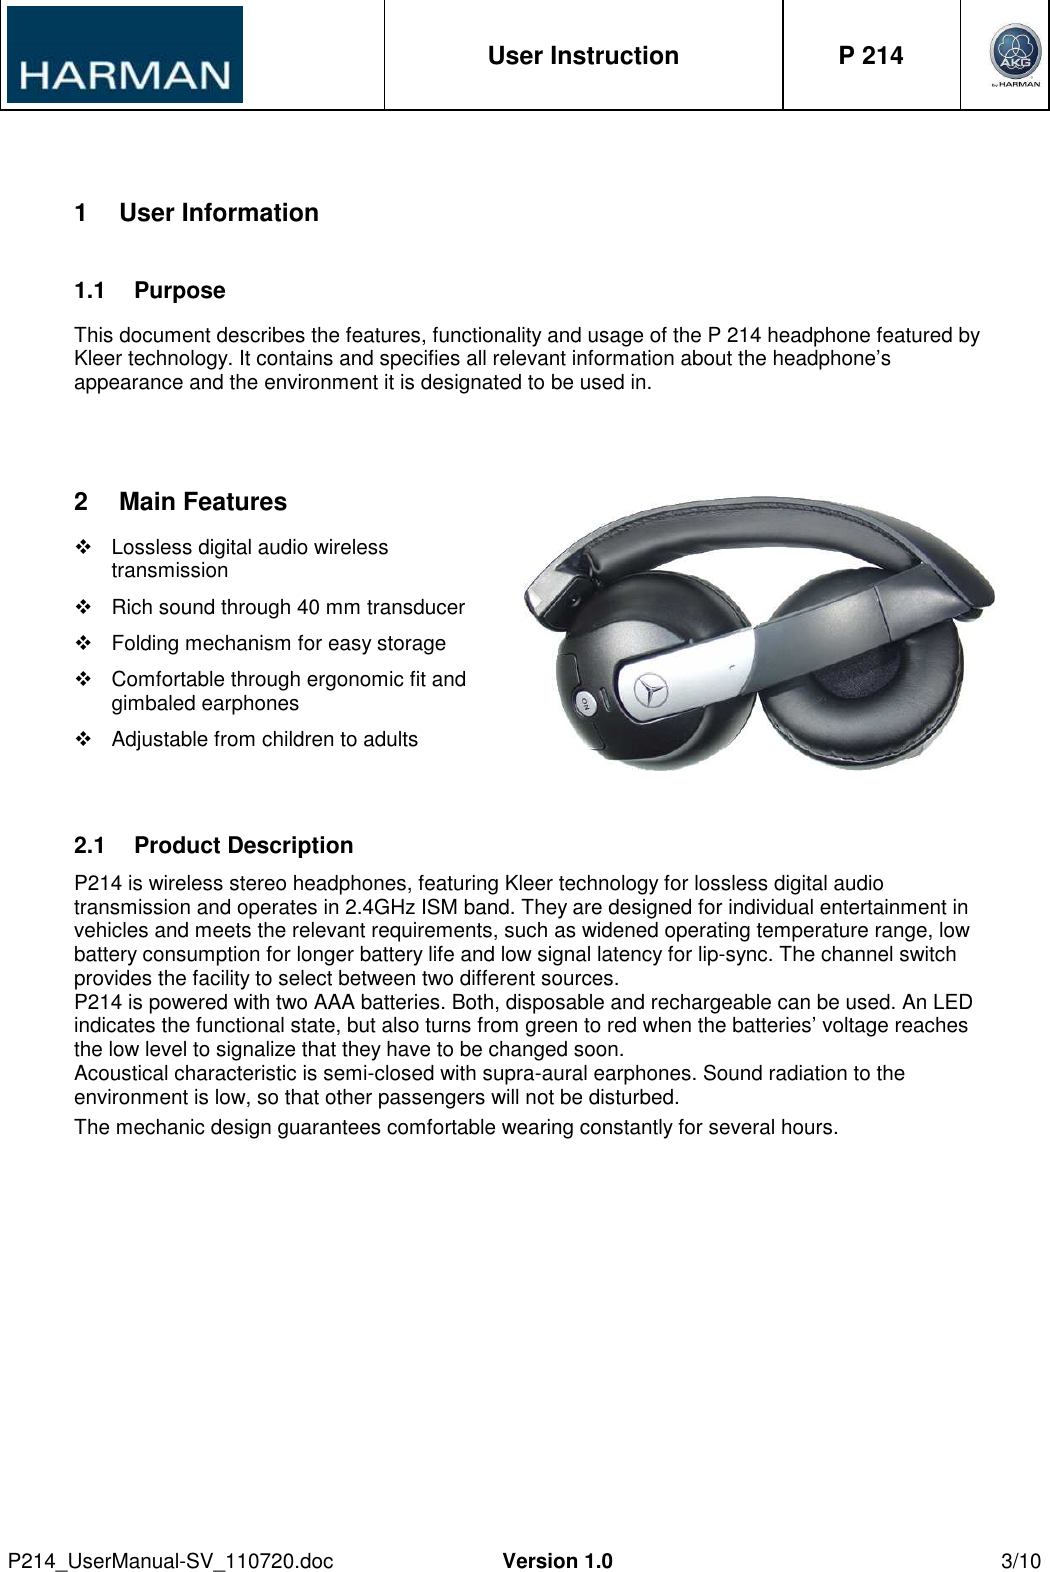  User Instruction  P 214     P214_UserManual-SV_110720.doc  Version 1.0  3/10  1  User Information 1.1  Purpose This document describes the features, functionality and usage of the P 214 headphone featured by Kleer technology. It contains and specifies all relevant information about the headphone’s appearance and the environment it is designated to be used in.  2  Main Features   Lossless digital audio wireless transmission   Rich sound through 40 mm transducer   Folding mechanism for easy storage   Comfortable through ergonomic fit and gimbaled earphones   Adjustable from children to adults  2.1  Product Description  P214 is wireless stereo headphones, featuring Kleer technology for lossless digital audio transmission and operates in 2.4GHz ISM band. They are designed for individual entertainment in vehicles and meets the relevant requirements, such as widened operating temperature range, low battery consumption for longer battery life and low signal latency for lip-sync. The channel switch provides the facility to select between two different sources. P214 is powered with two AAA batteries. Both, disposable and rechargeable can be used. An LED indicates the functional state, but also turns from green to red when the batteries’ voltage reaches the low level to signalize that they have to be changed soon. Acoustical characteristic is semi-closed with supra-aural earphones. Sound radiation to the environment is low, so that other passengers will not be disturbed. The mechanic design guarantees comfortable wearing constantly for several hours. 